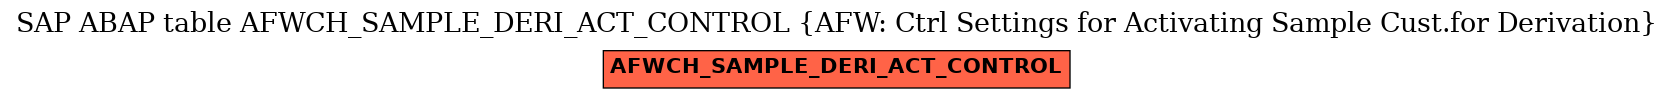 E-R Diagram for table AFWCH_SAMPLE_DERI_ACT_CONTROL (AFW: Ctrl Settings for Activating Sample Cust.for Derivation)